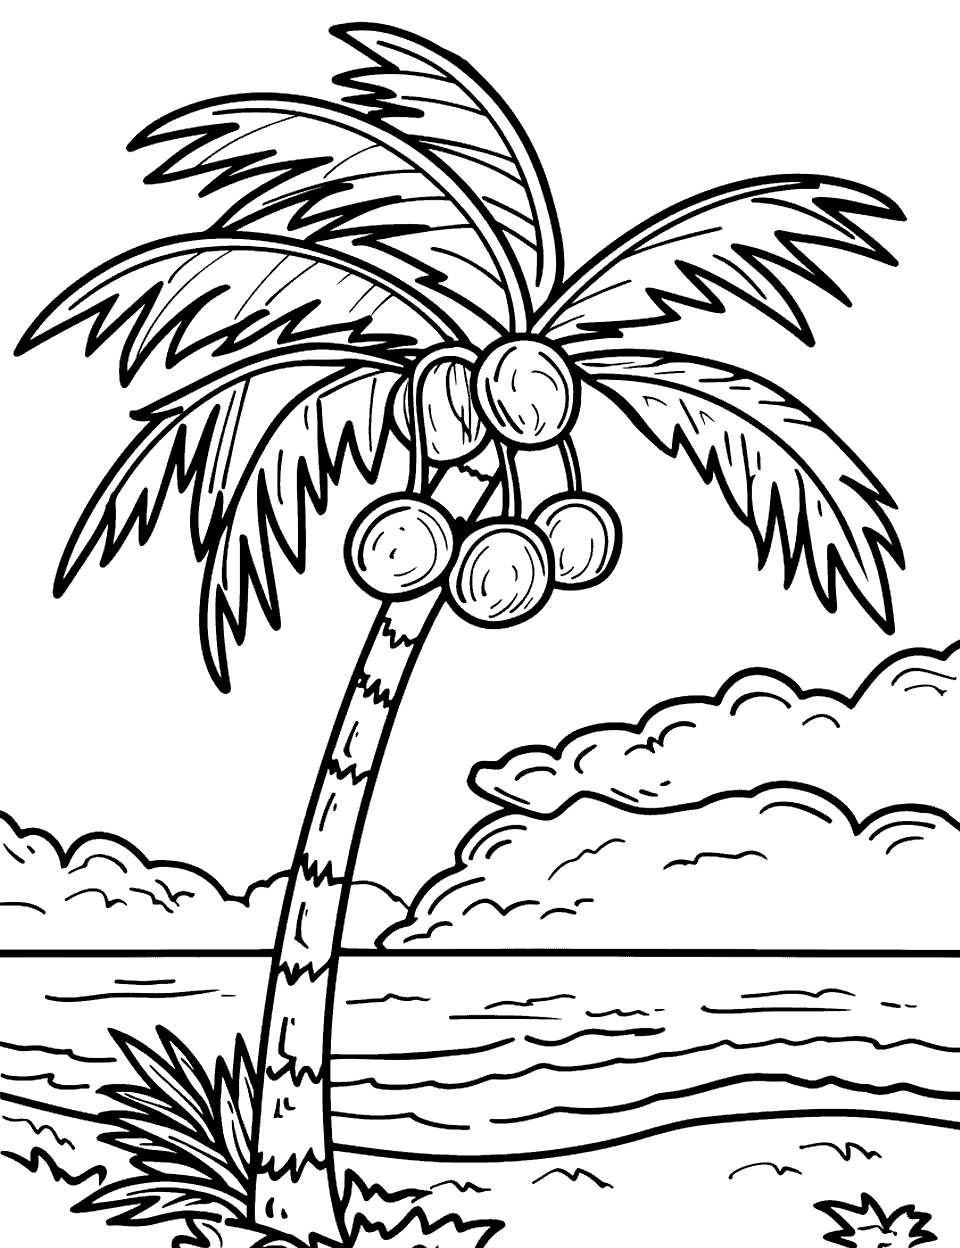 Tropical Coconut Tree Coloring Page - A coconut tree with coconuts hanging from its branches near the beach.